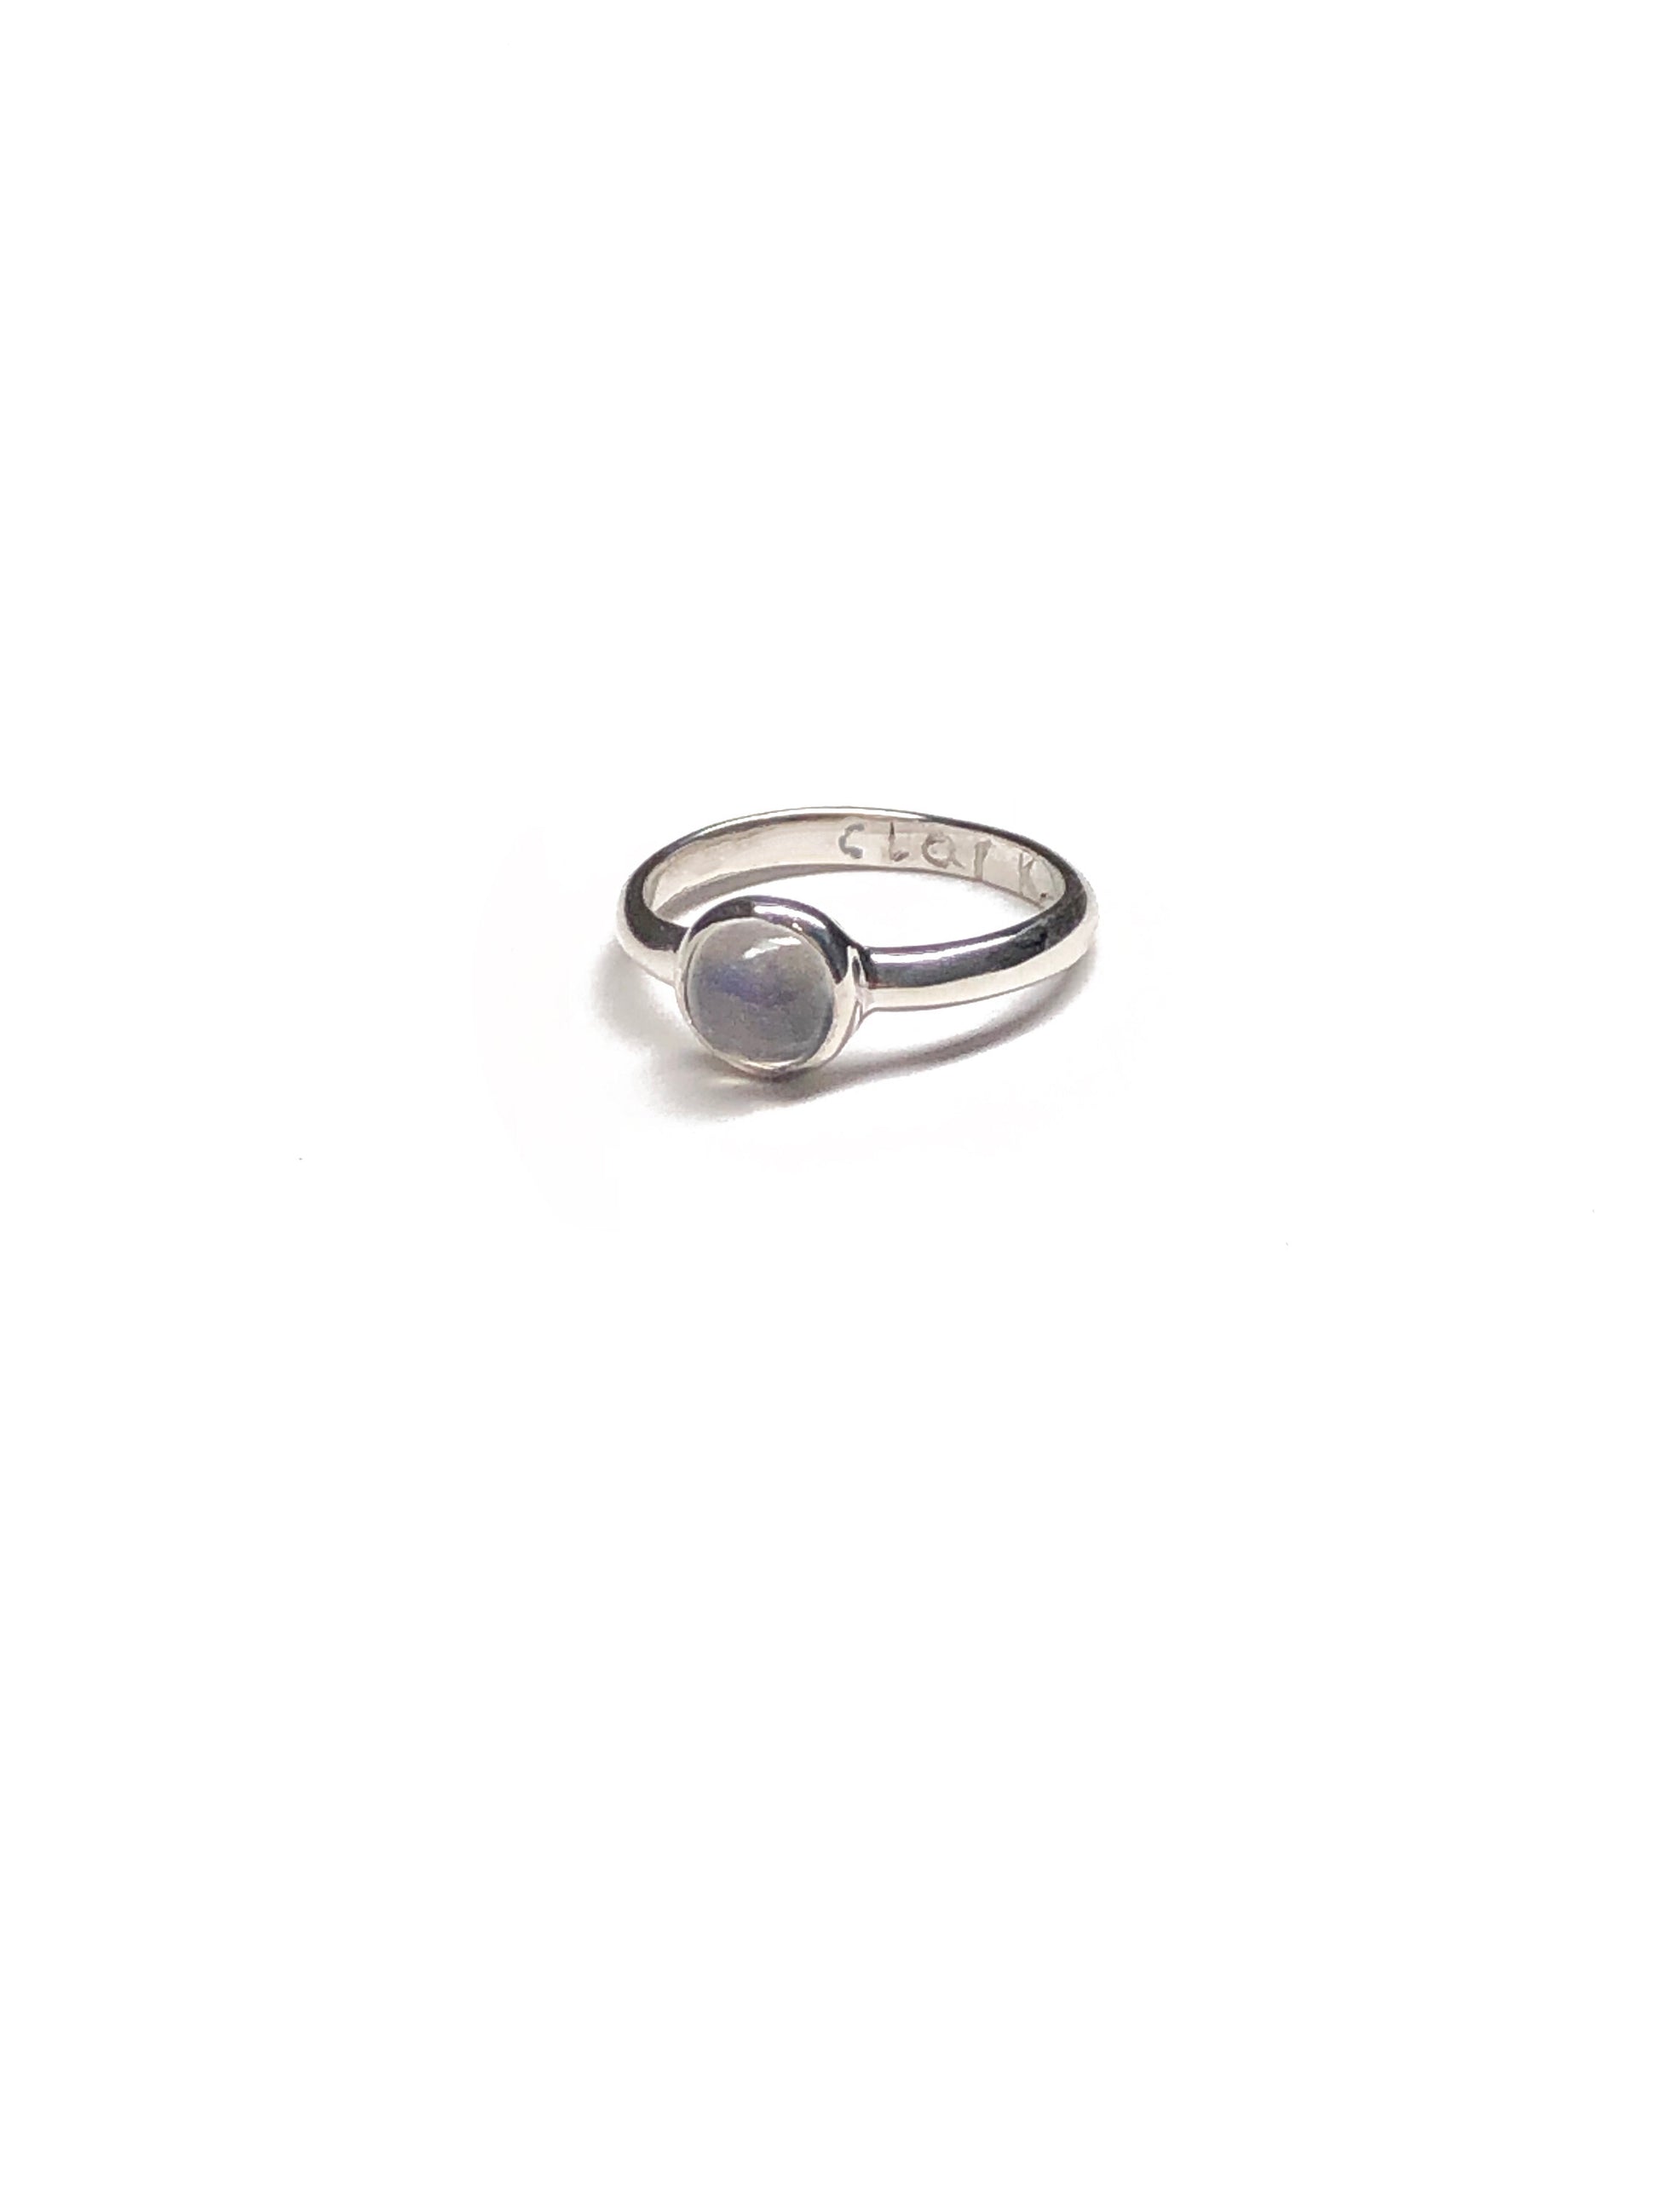 Product photo of Magic Moonstone Ring by CLARK shot on white. Ring shows cabochon set moonstone and hand engraved “CLARK.” The ring is sterling silver and made using the lost wax casting method. 